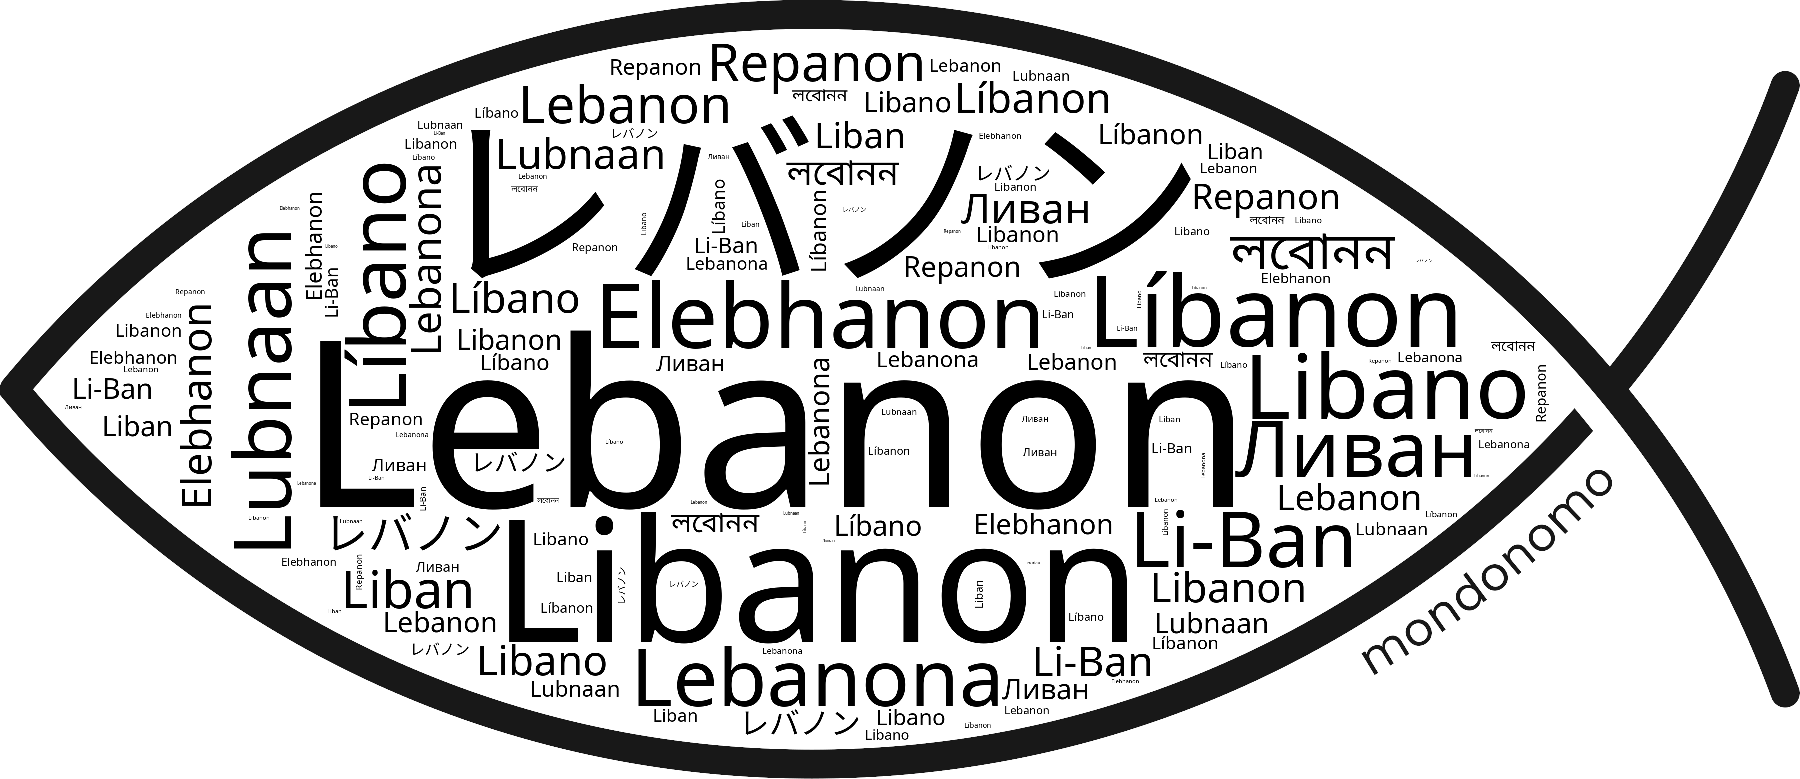 Name Lebanon in the world's Bibles